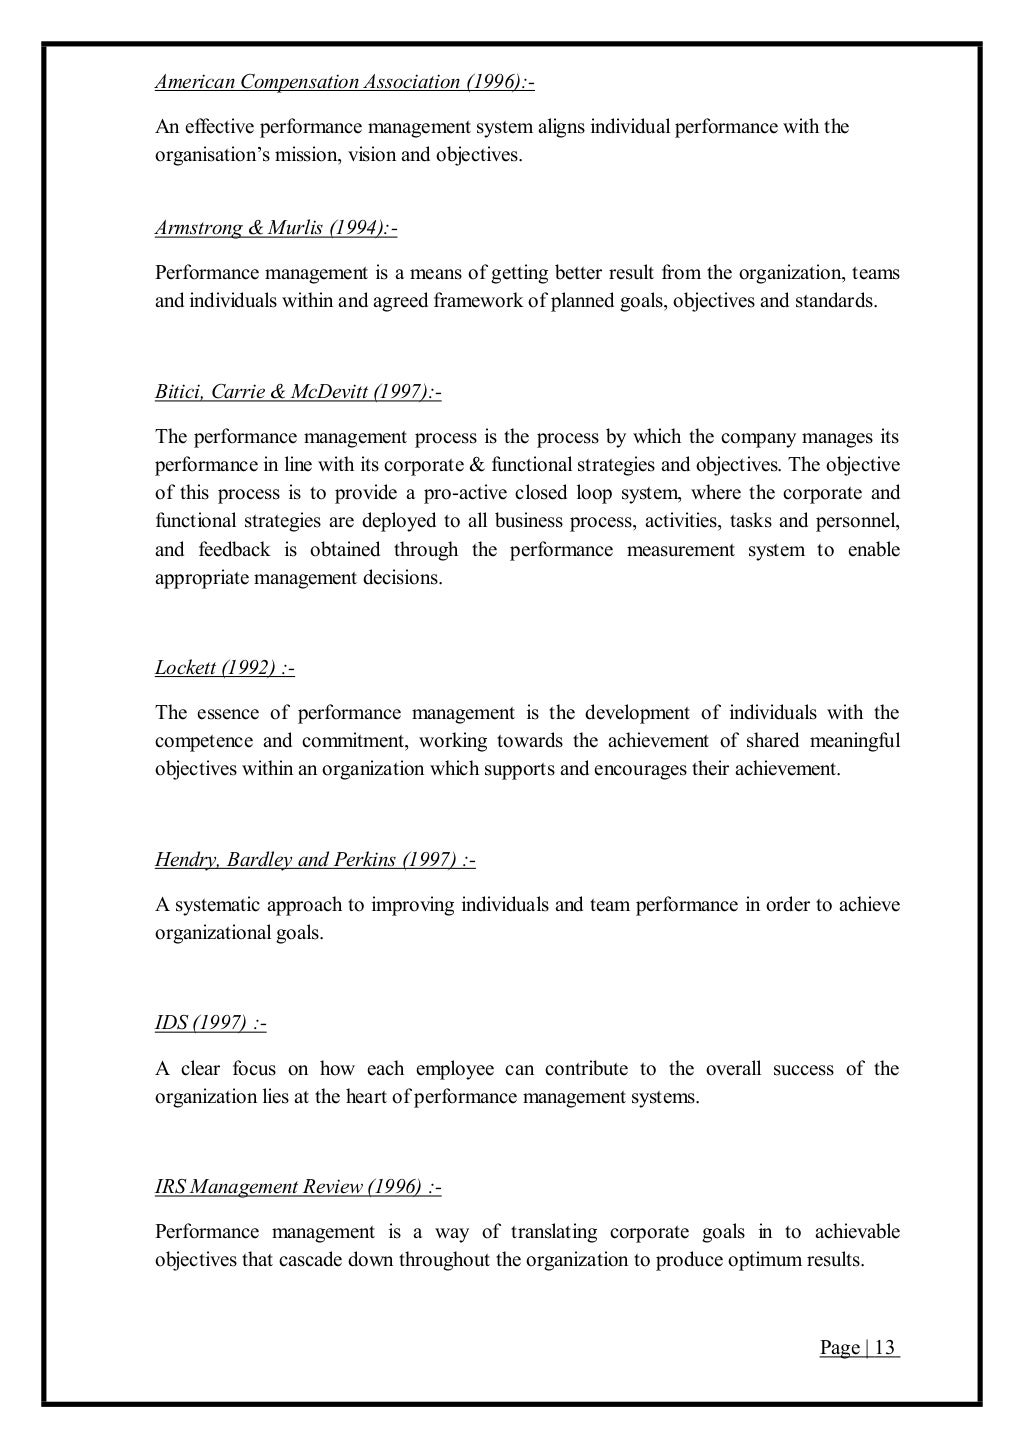 phd thesis on performance management system